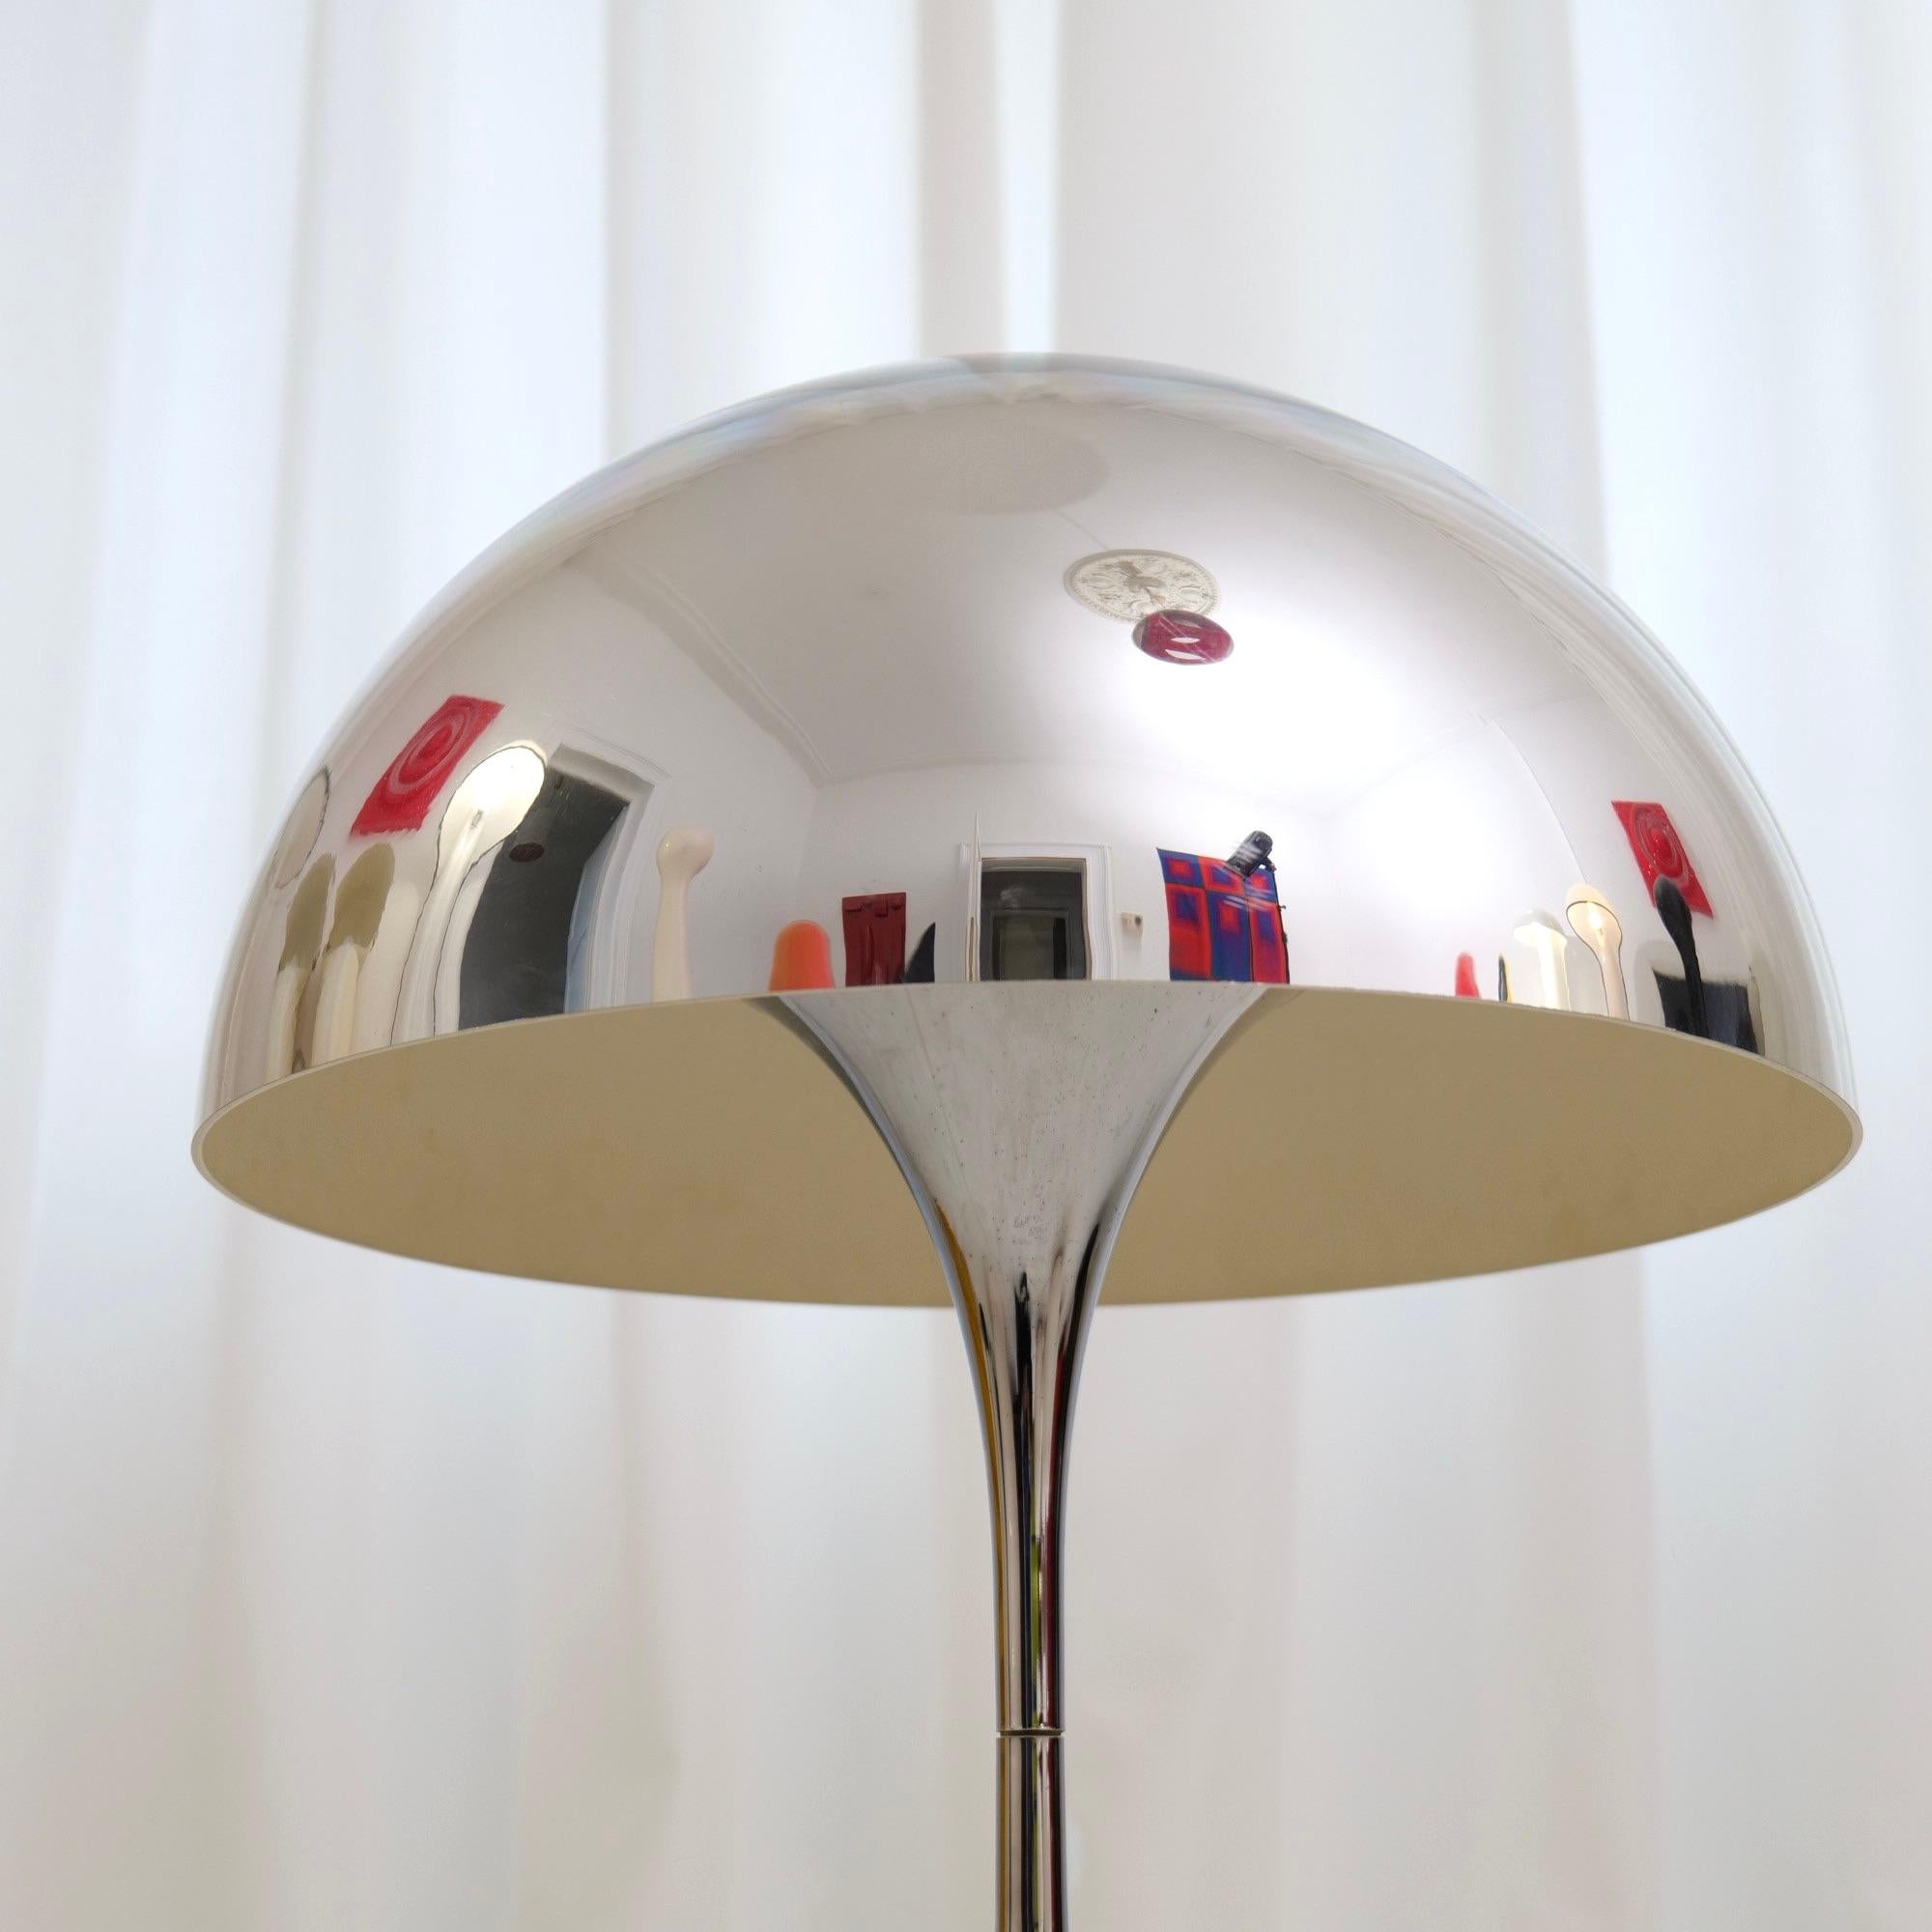 vintage big chrome Panthella lamp.

designed by Verner Panton for Louis Poulsen - 1970s

Made in Denmark

dimensions:
79 cm heigh
50 cm diametre
very good condition with slight signs of use and patina.